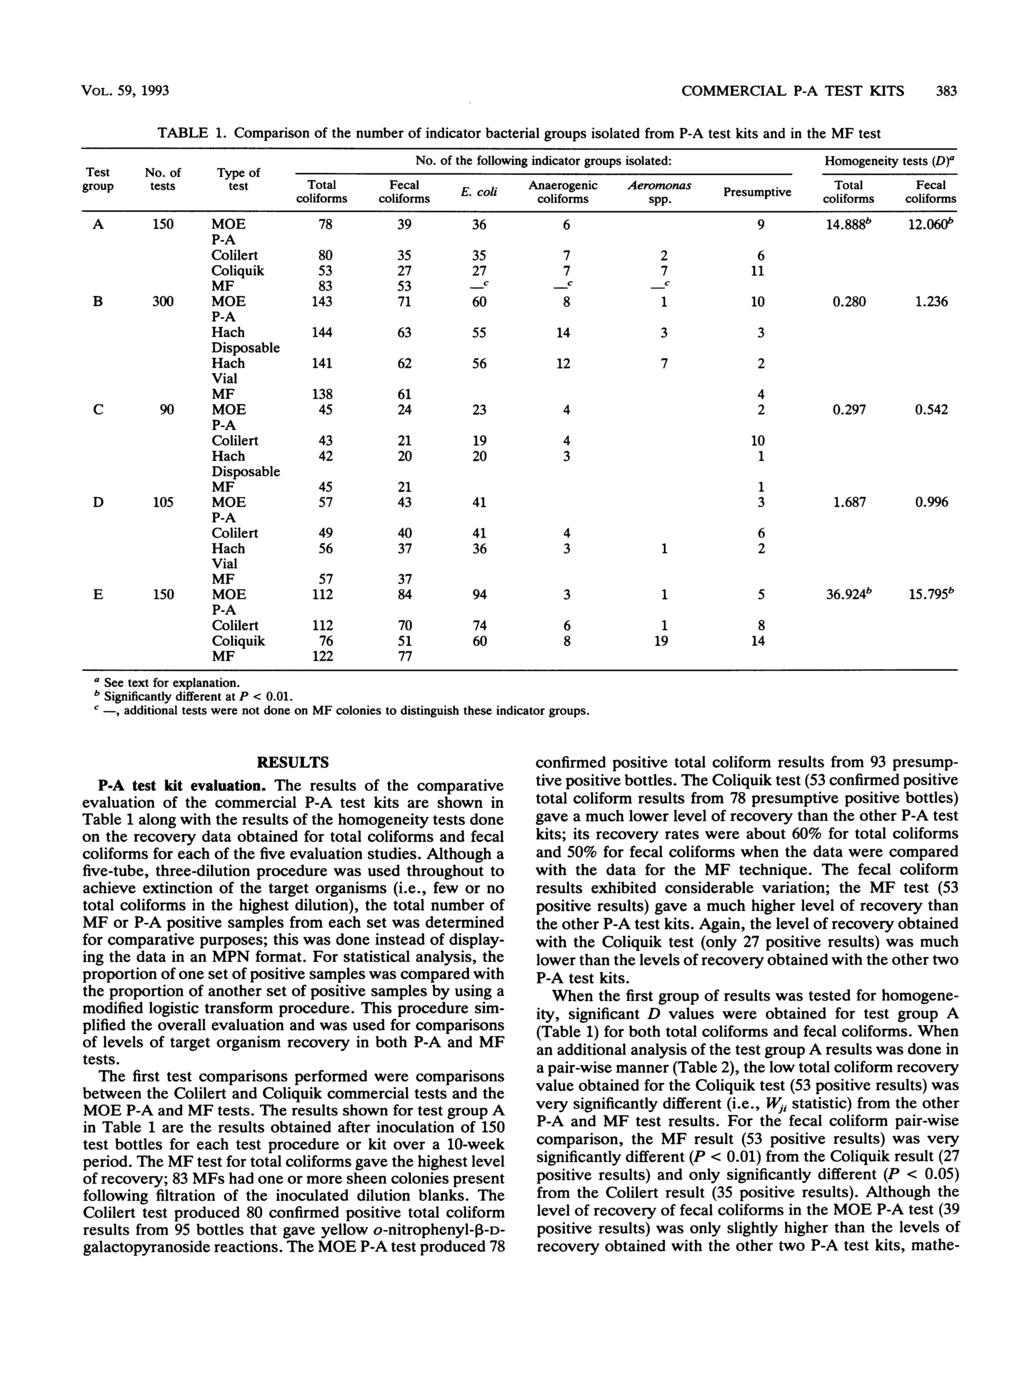 VOL. 59, 1993 COMMERCAL TEST KTS 383 TABLE 1. Comparison of the number of indicator bacterial groups isolated from test kits and in the MF test No.